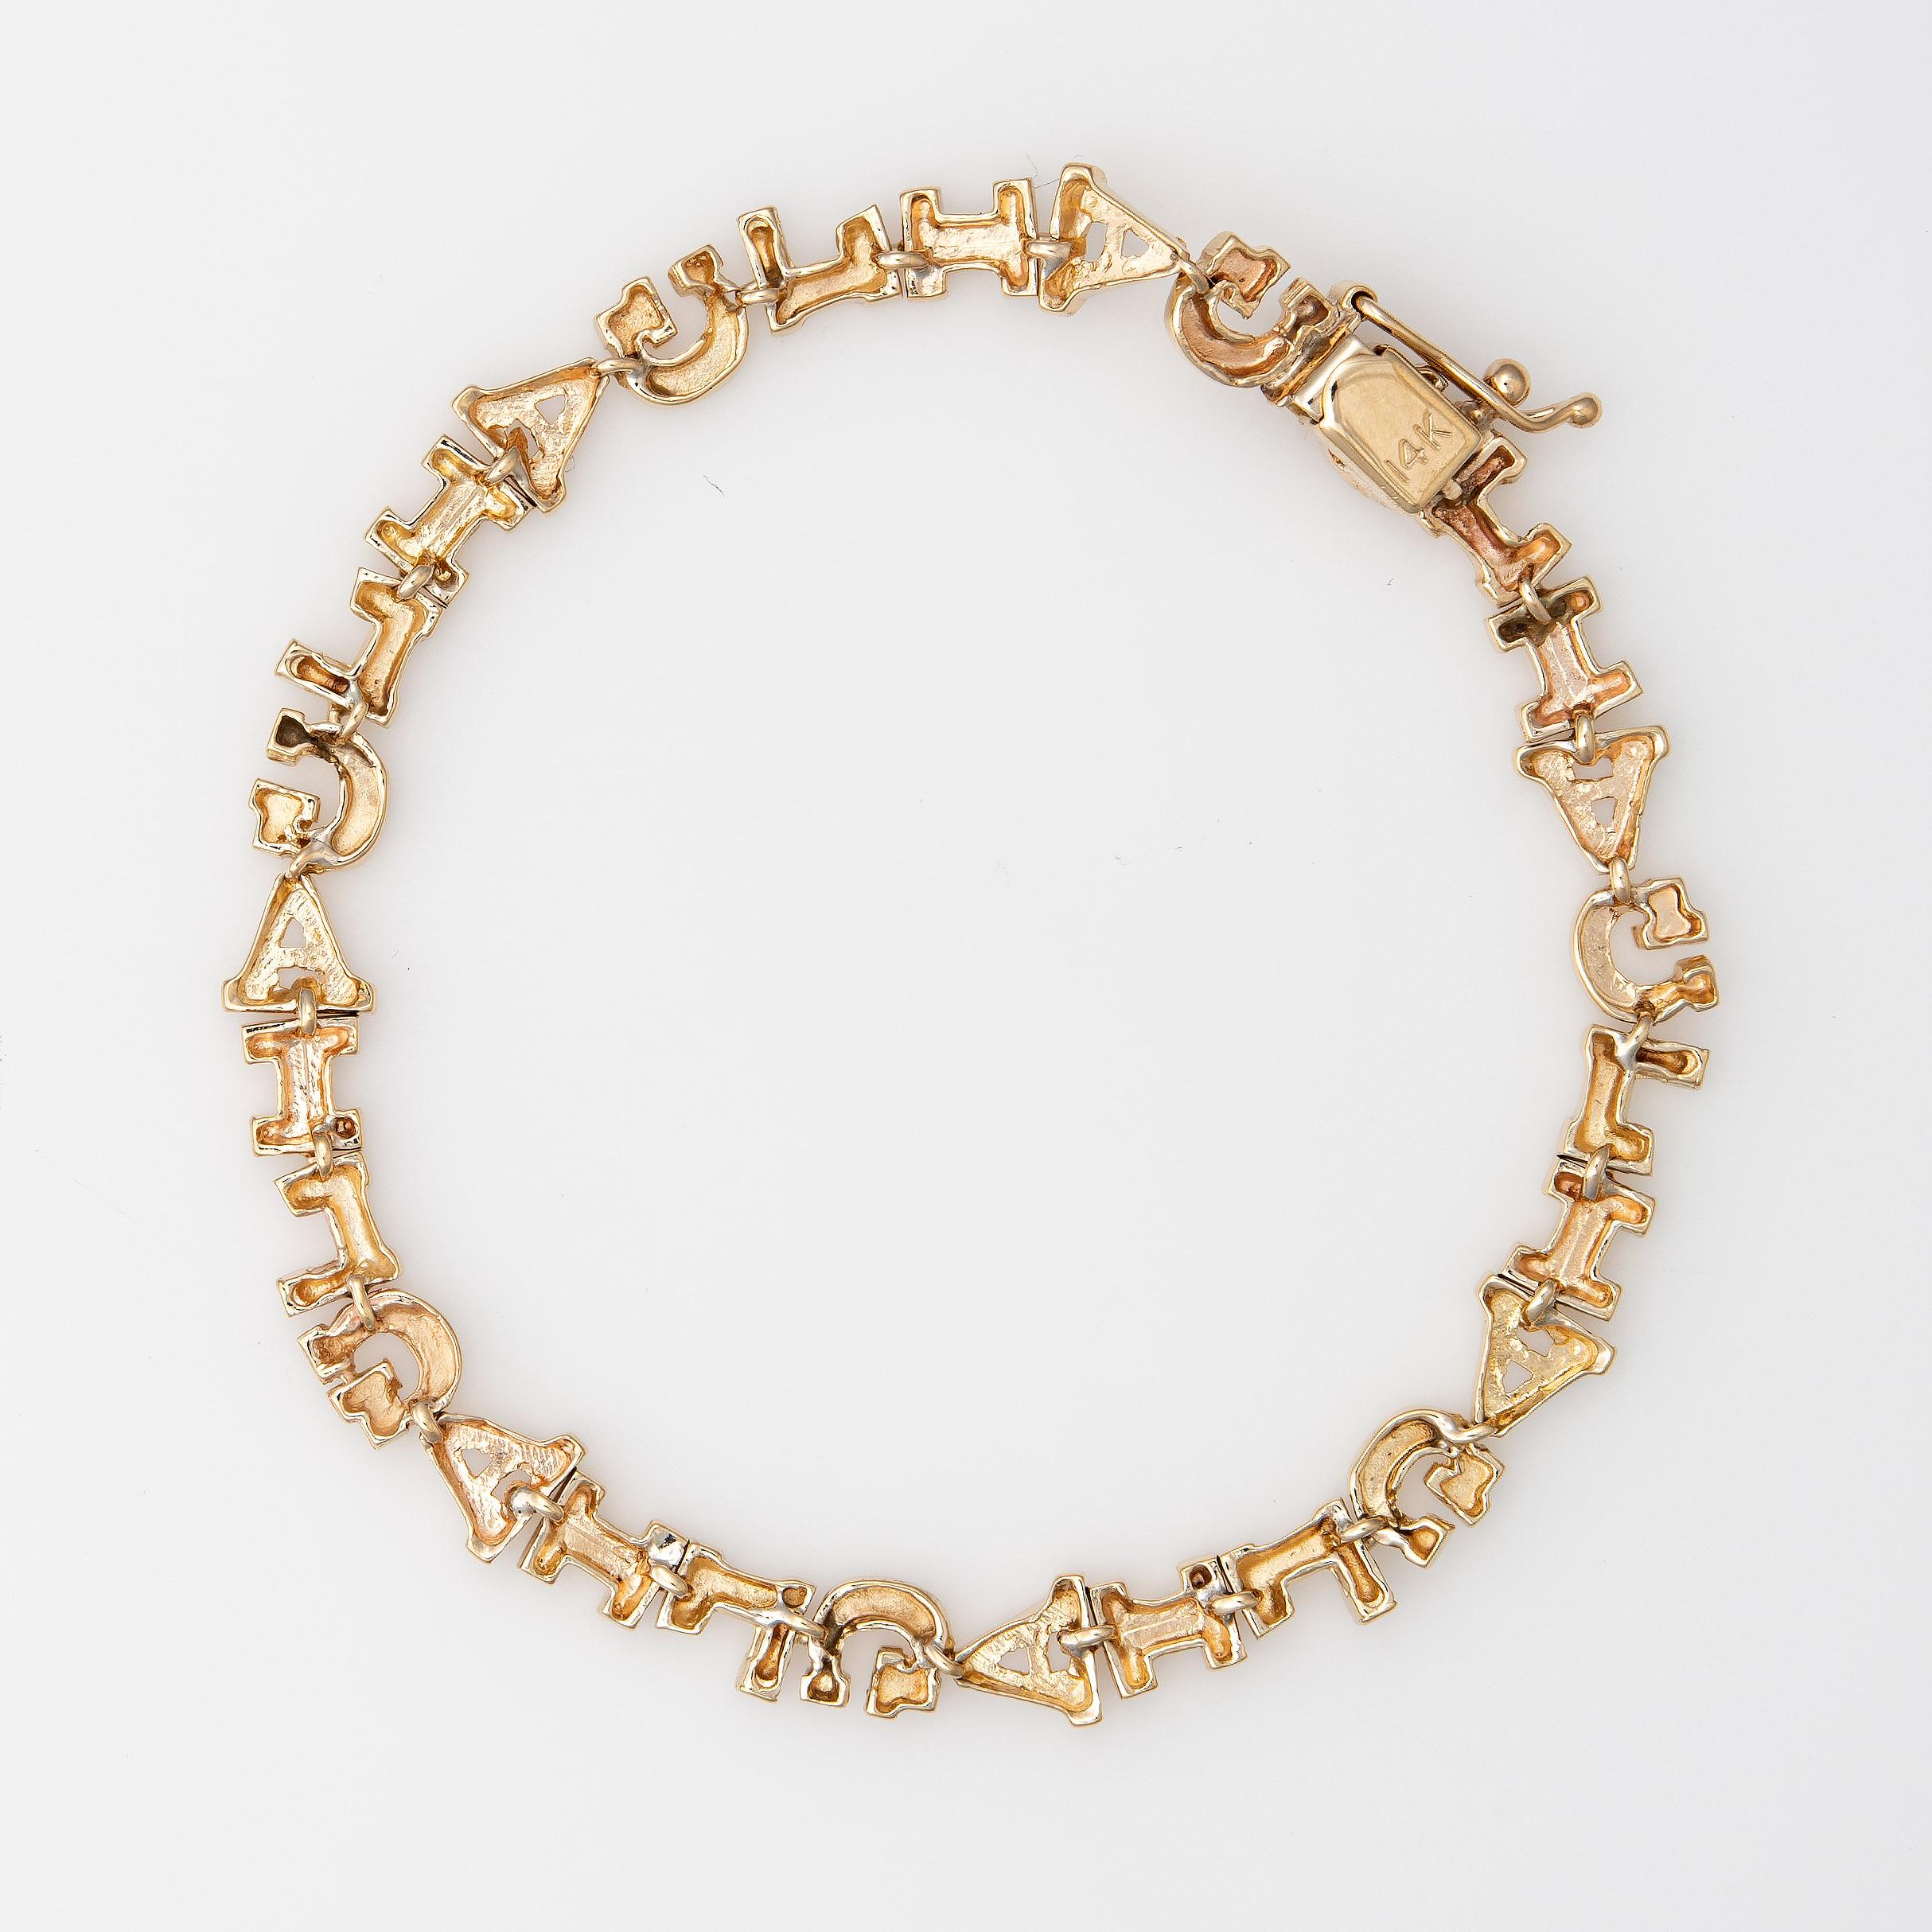 Distinct 'Gail' vintage nameplate bracelet crafted in 14k yellow gold. 

The bracelet makes a great statement on the wrist. If you name is 'Gail' you are in luck! The bracelet features a slip lock closure and safety chain. Ideal worn alone or